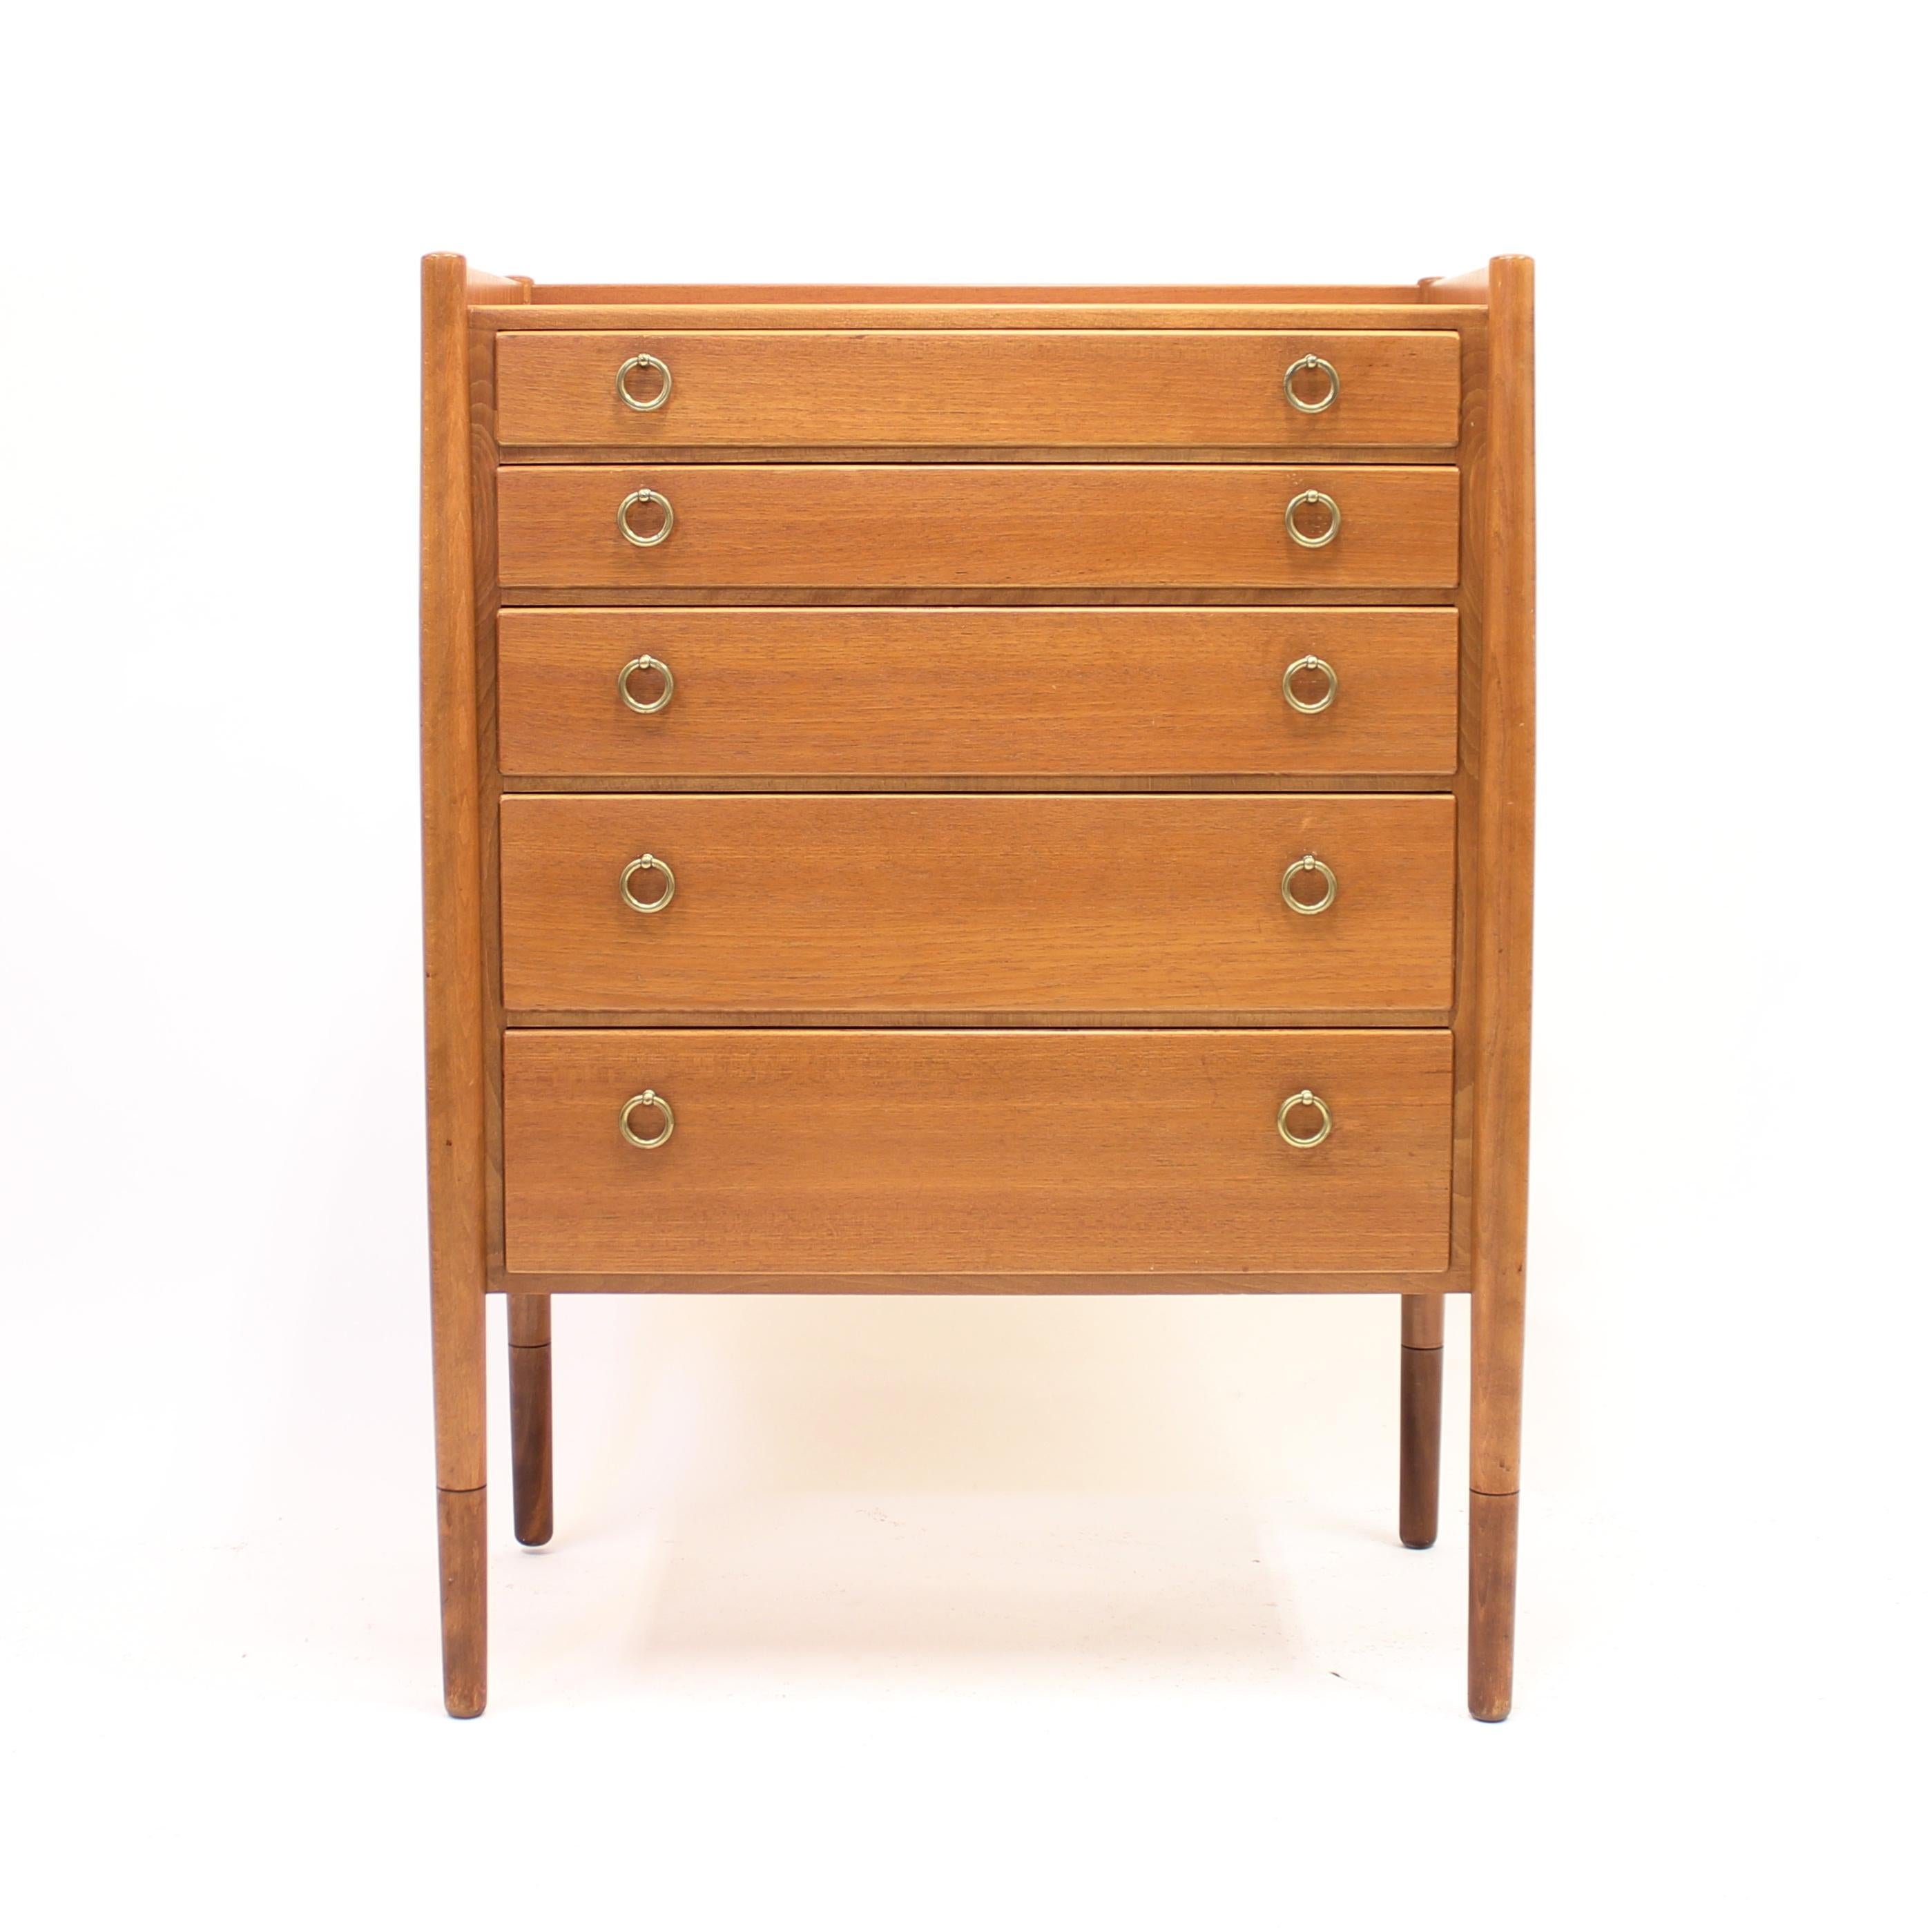 Brass Swedish Mid-Century Teak Chest of Drawers by Treman, 1960s For Sale